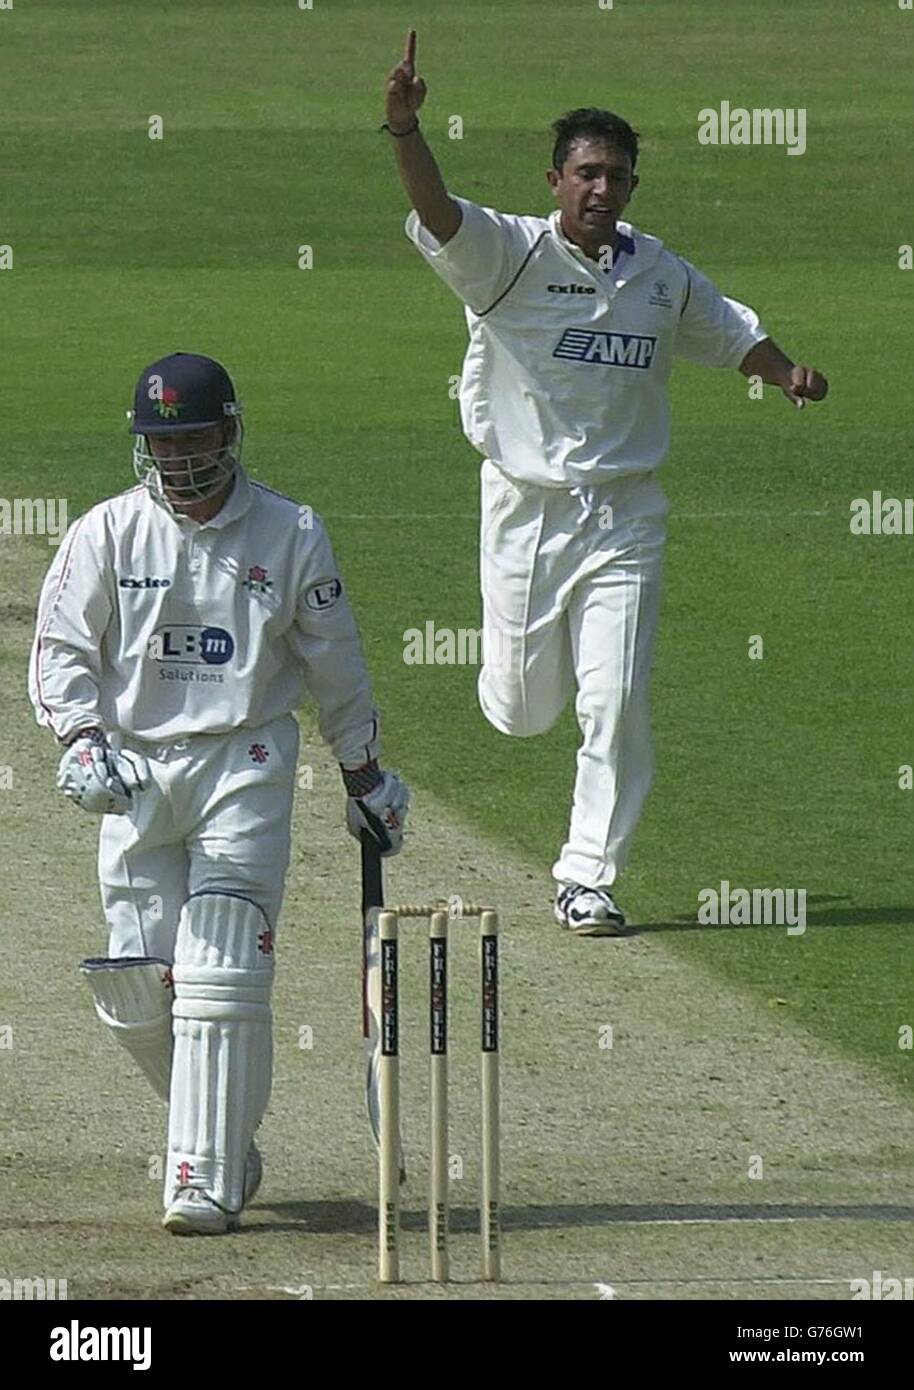 Lancashire batsman and wicketkeeper, Warren Hegg, leaves the field as Surrey bowler Ahzar Mahmood celebrates having dismissed him for nine on the first day of their county fixture at The Oval, London. Stock Photo